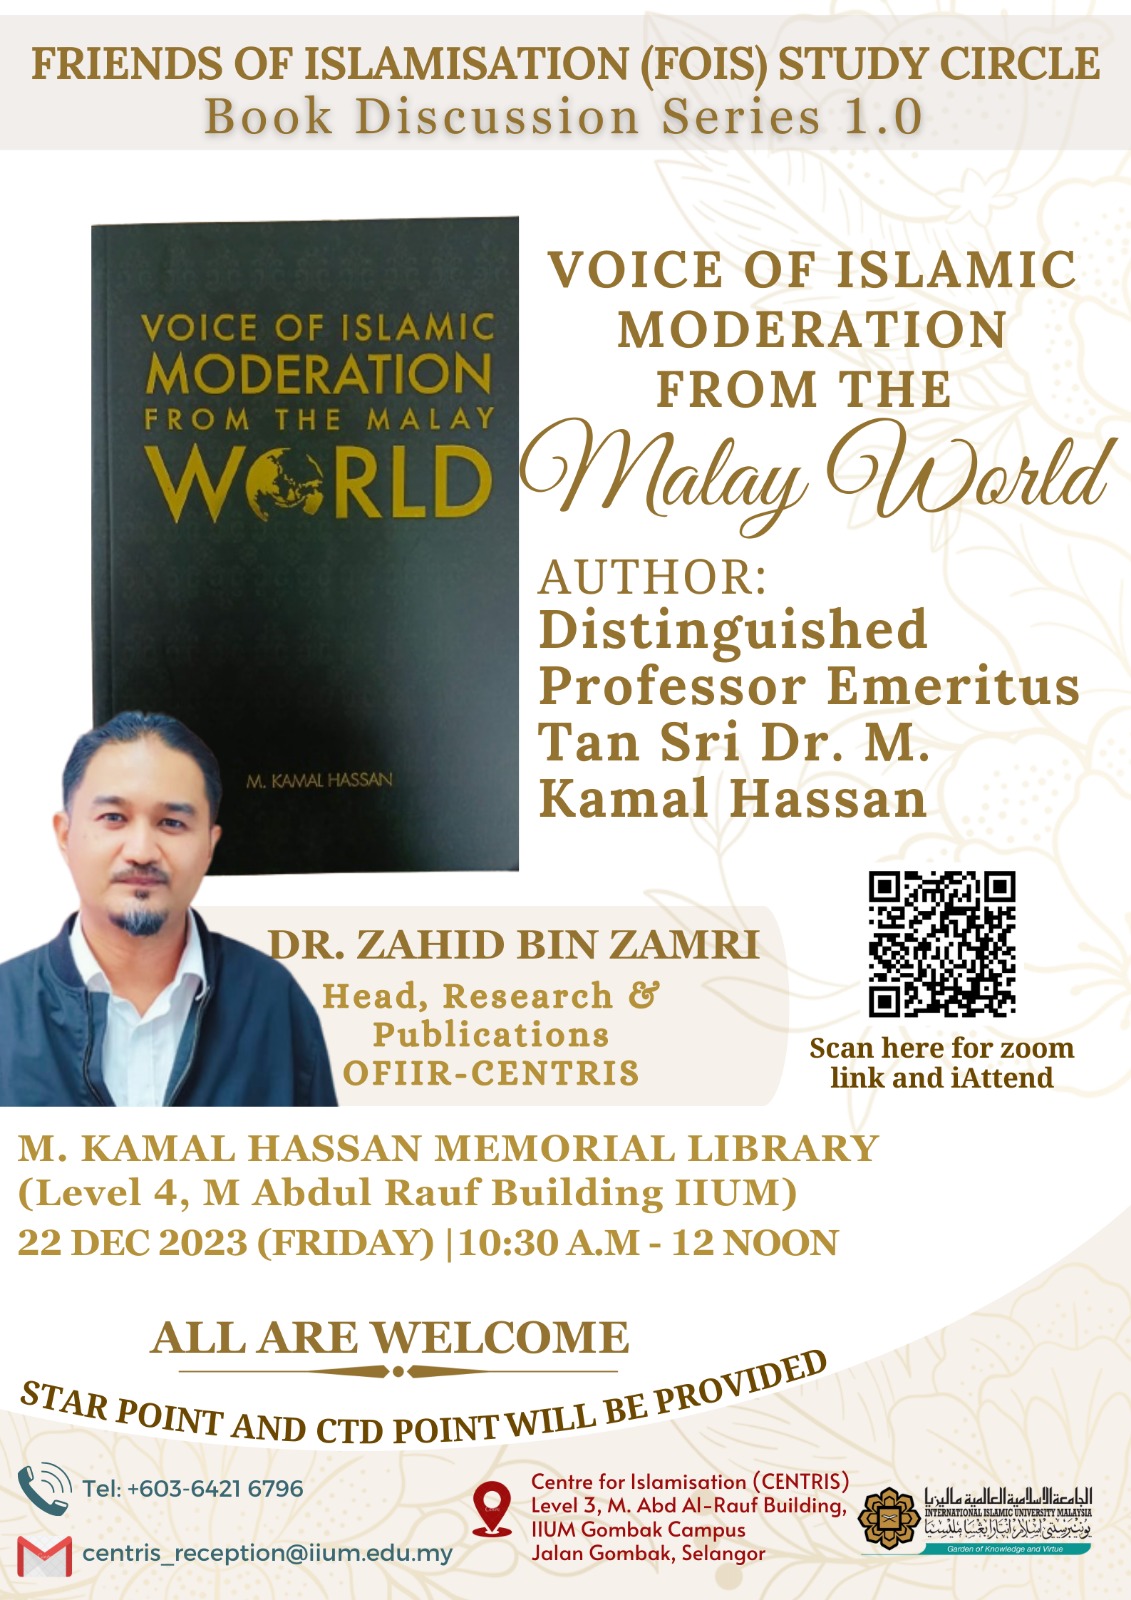 VOICE OF ISLAMIC MODERATION FROM THE MALAY WORLD